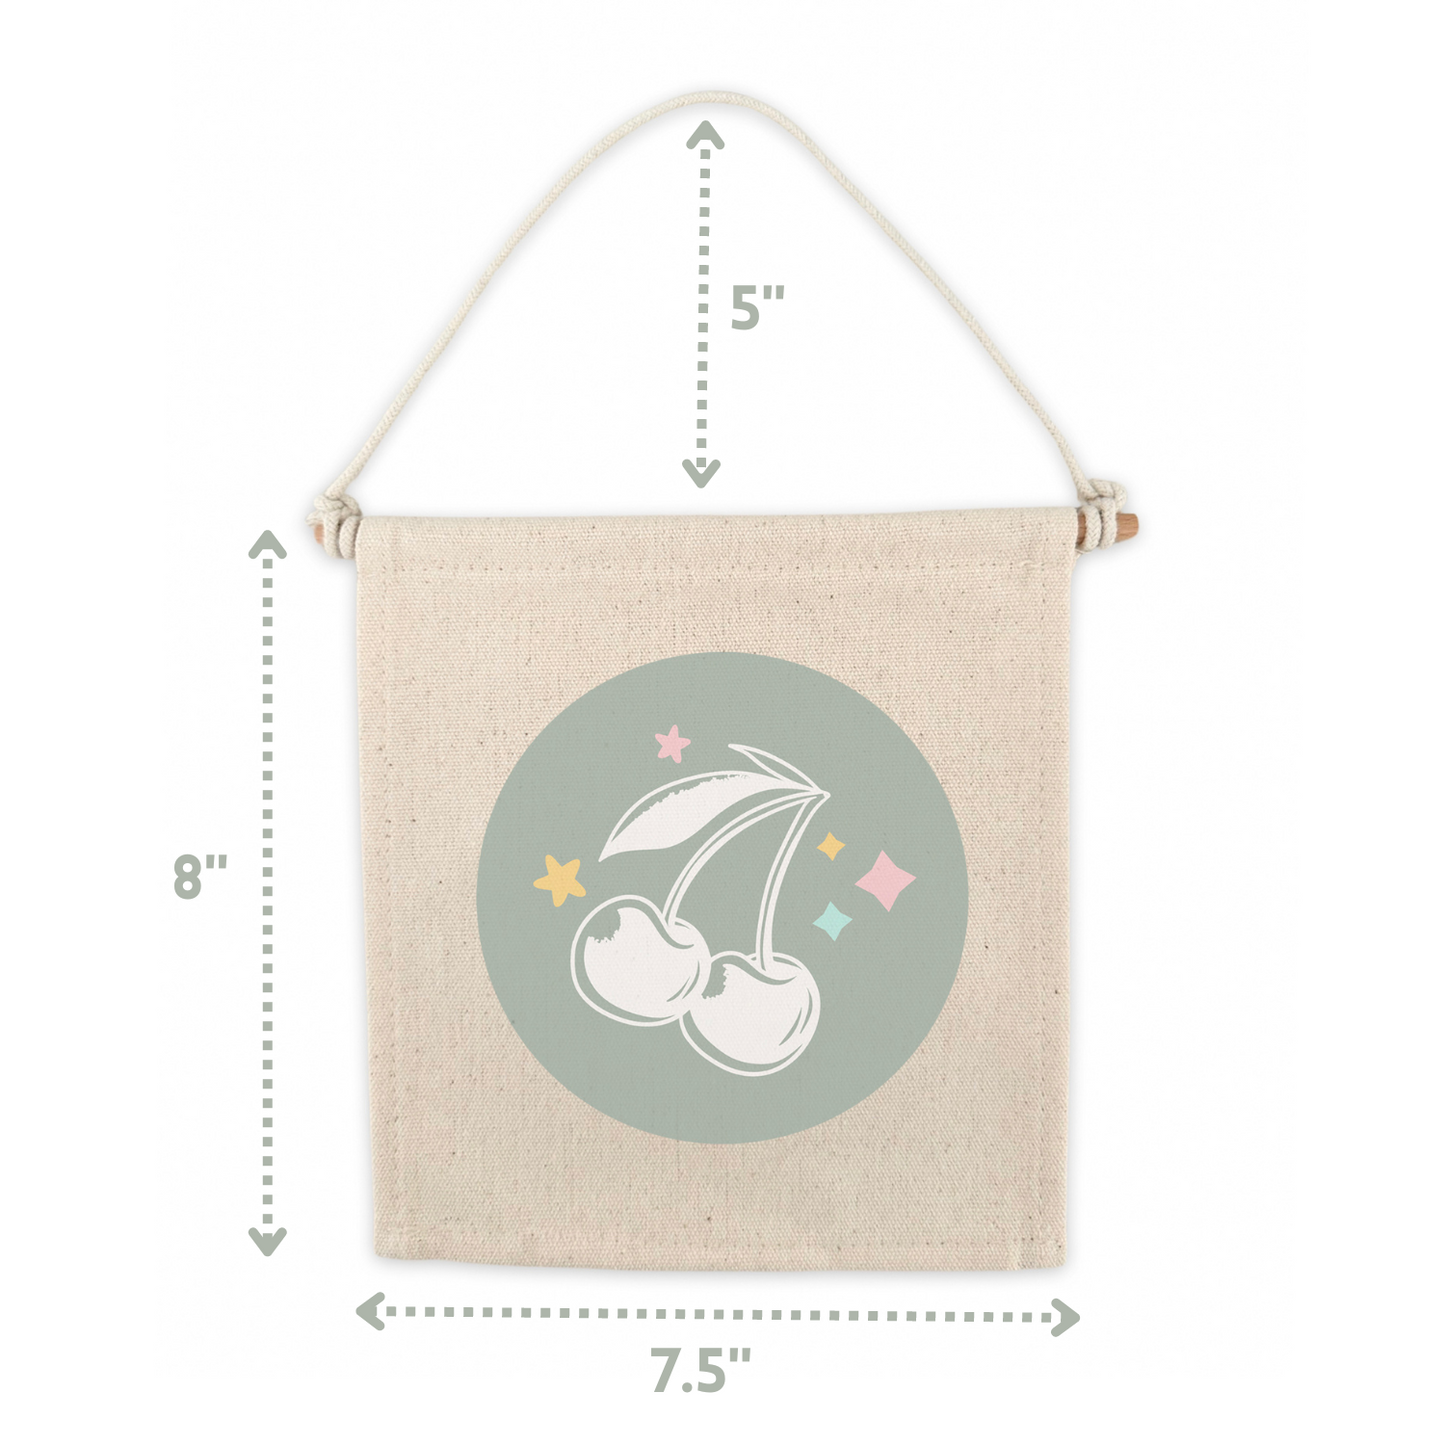 Little Babe Cave Canvas Hang Sign